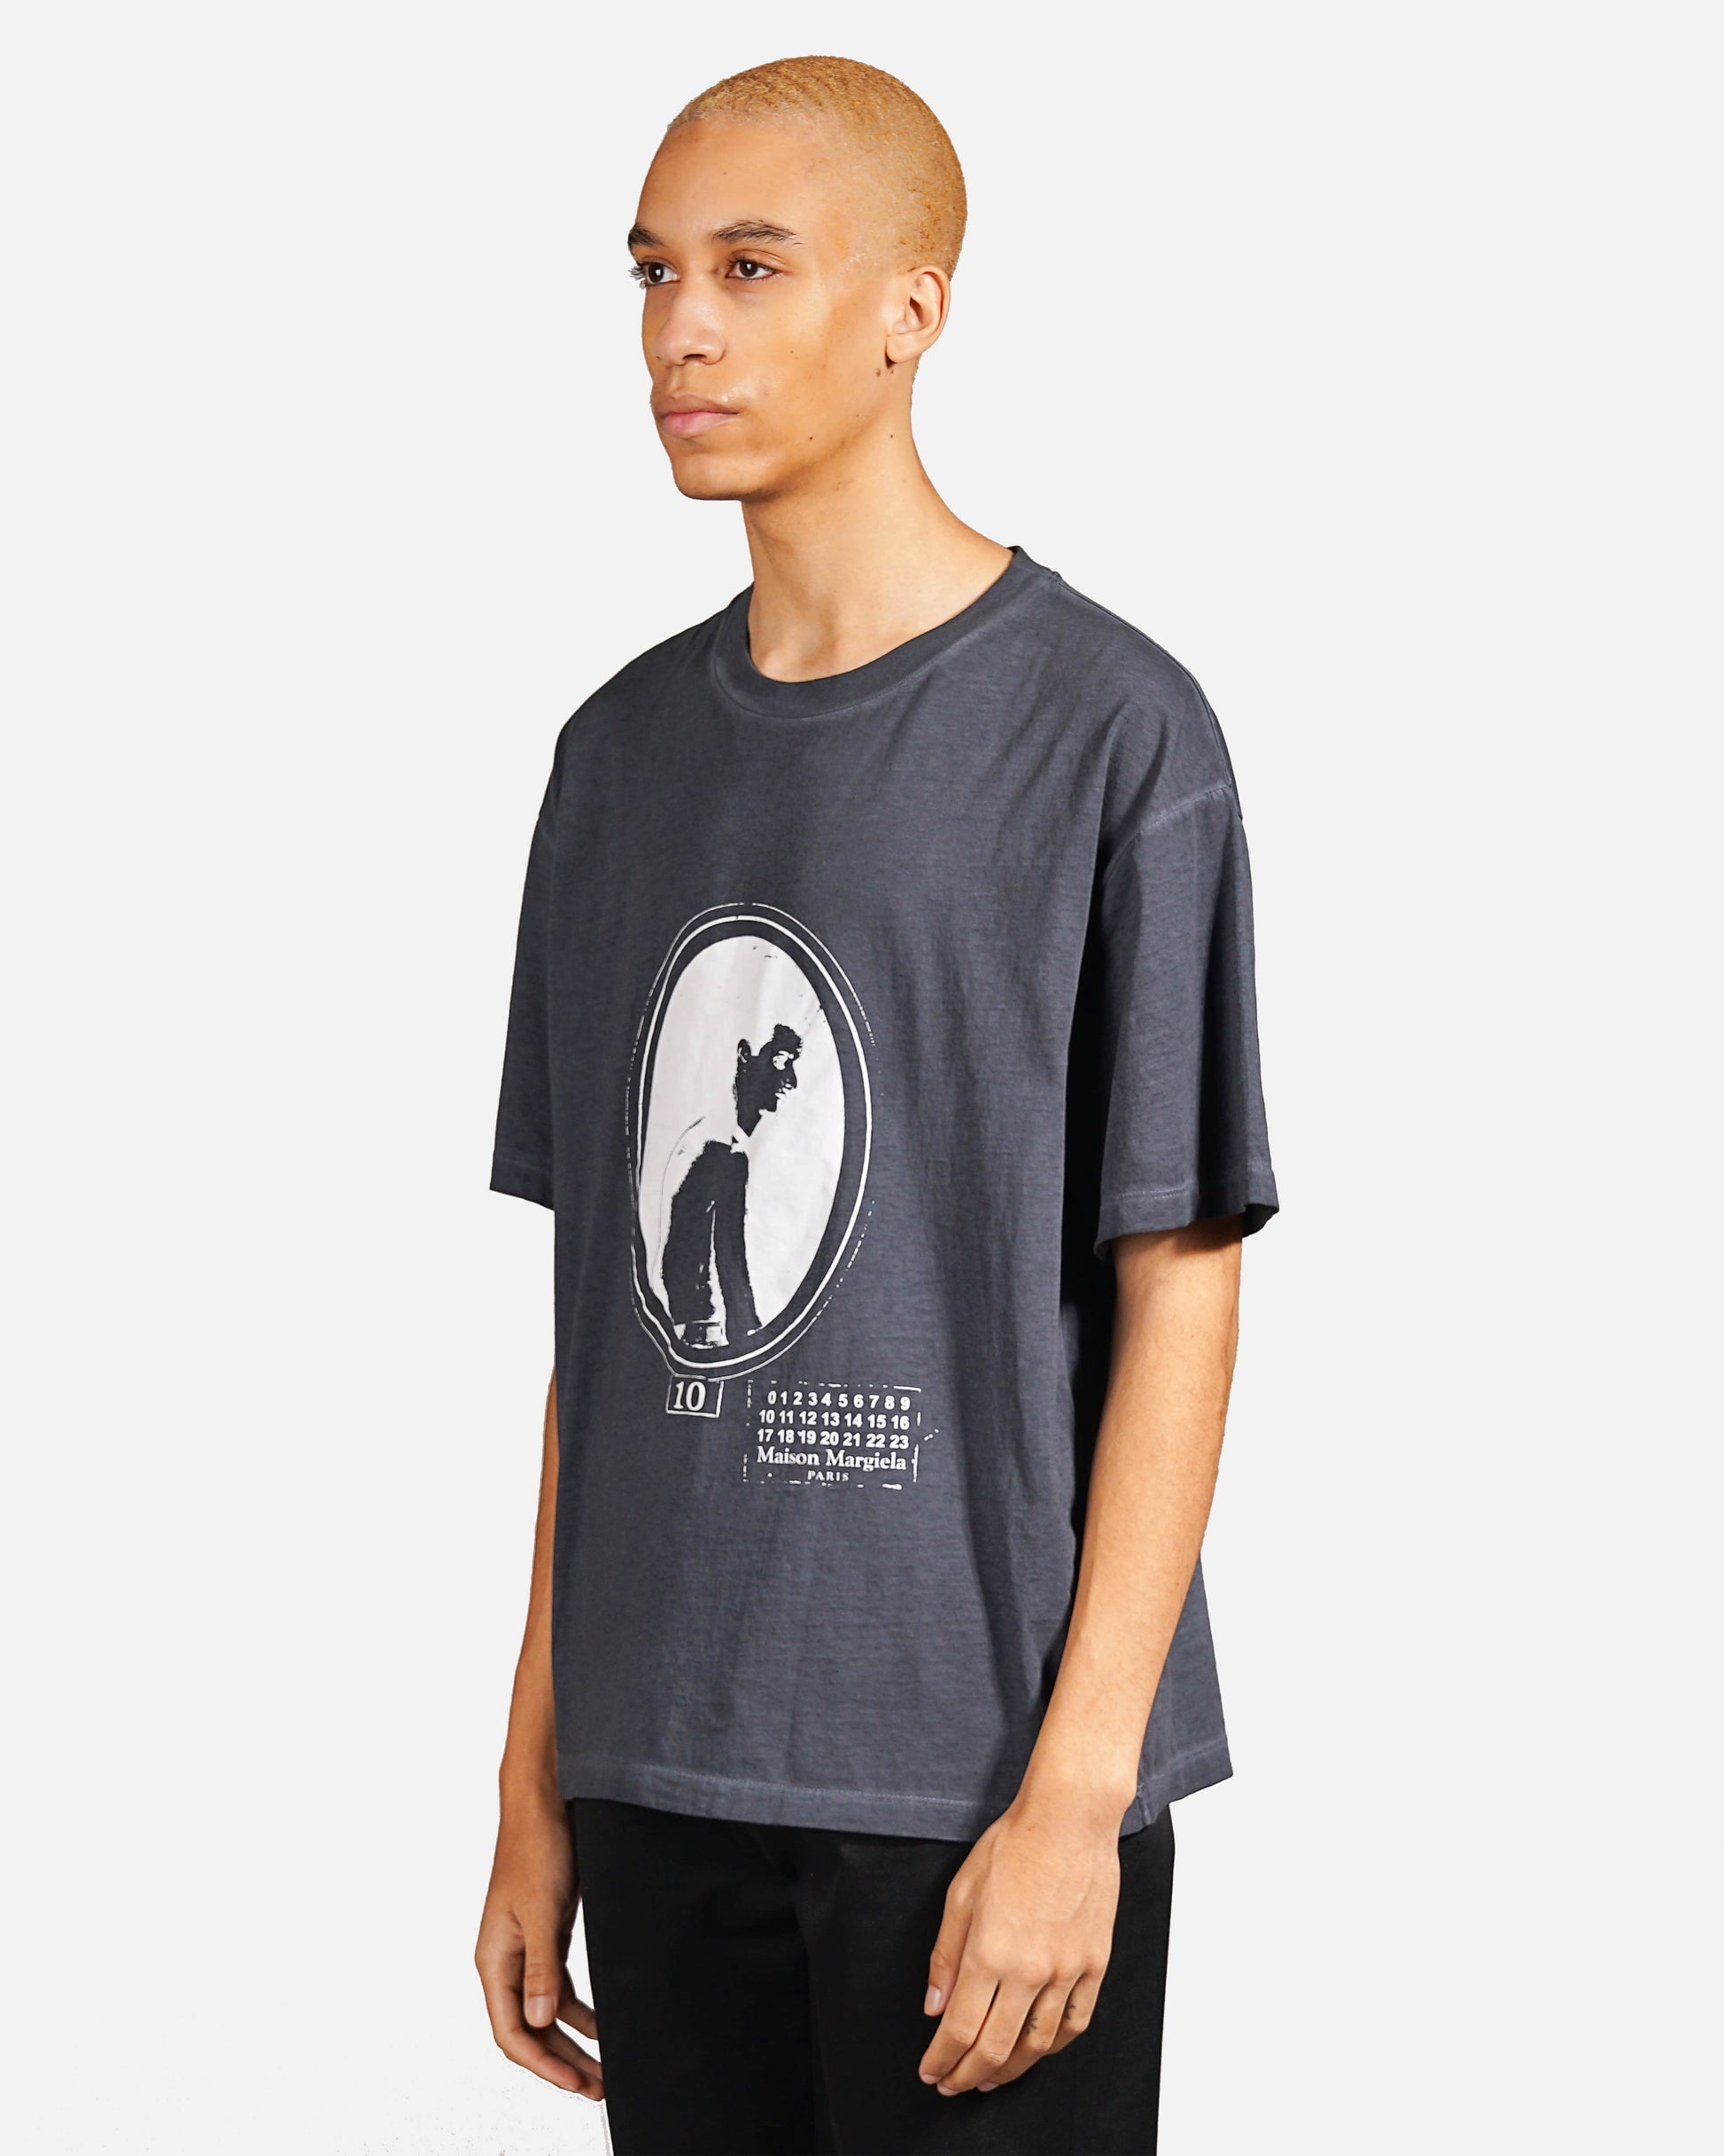 Maison Margiela Men's T-Shirts Silhouette Print Tee in Anthracite